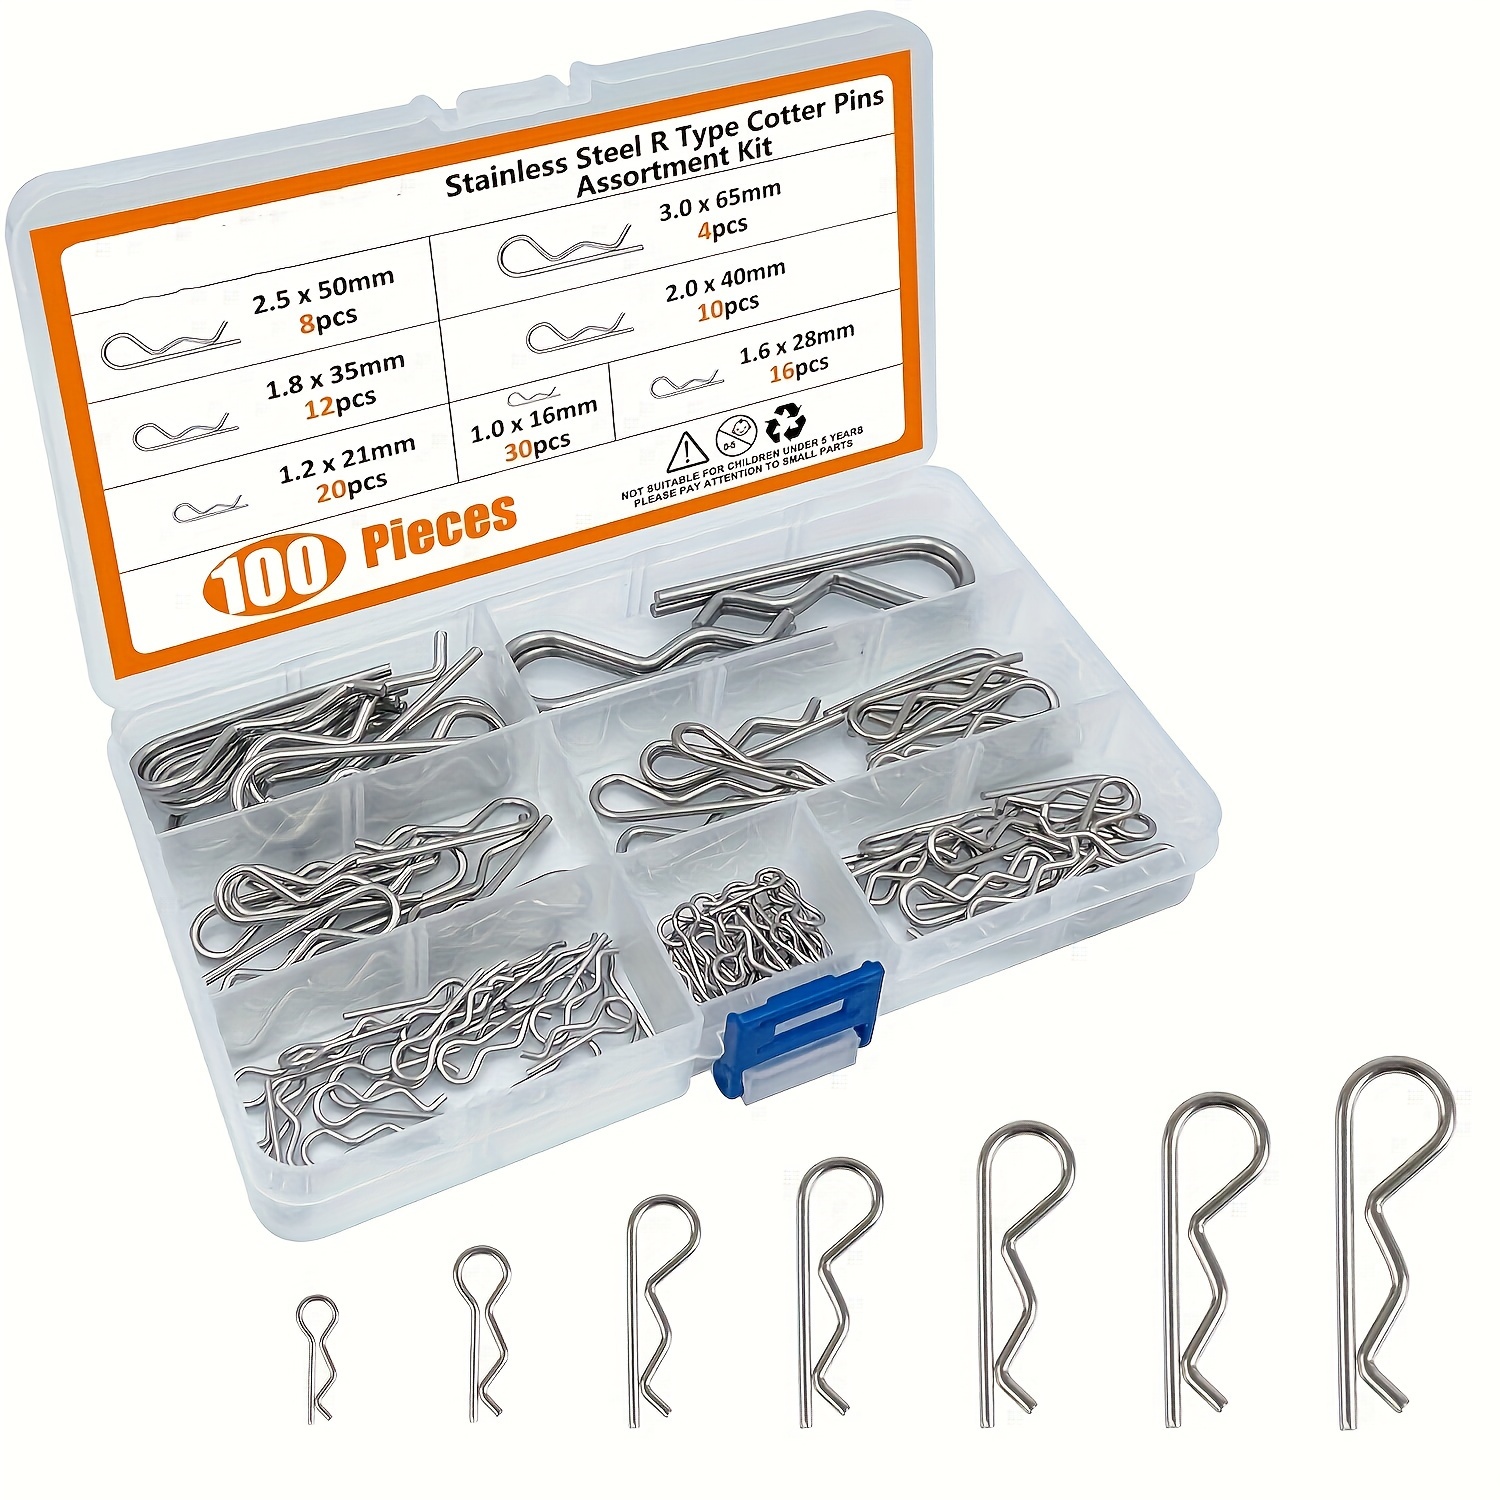 

100-piece Stainless Steel Cotter Pin Assortment Kit - R-type Clips For Bolt Locking Systems, Metal Dowel Pin Fasteners, Durable & Easy Installation